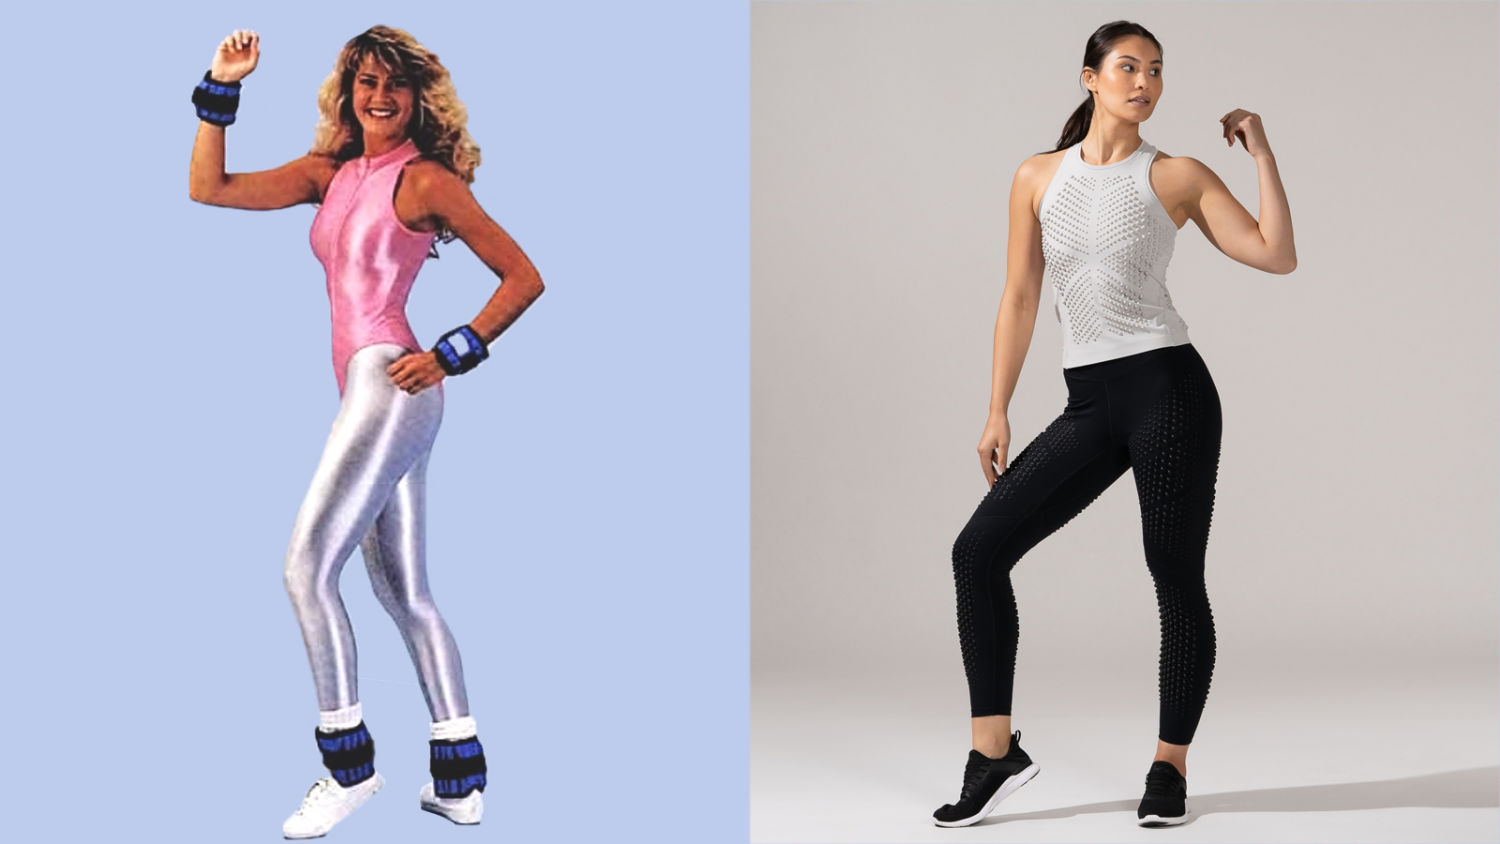 Former Nike Executives Start Omorpho Weighted Workout Clothing